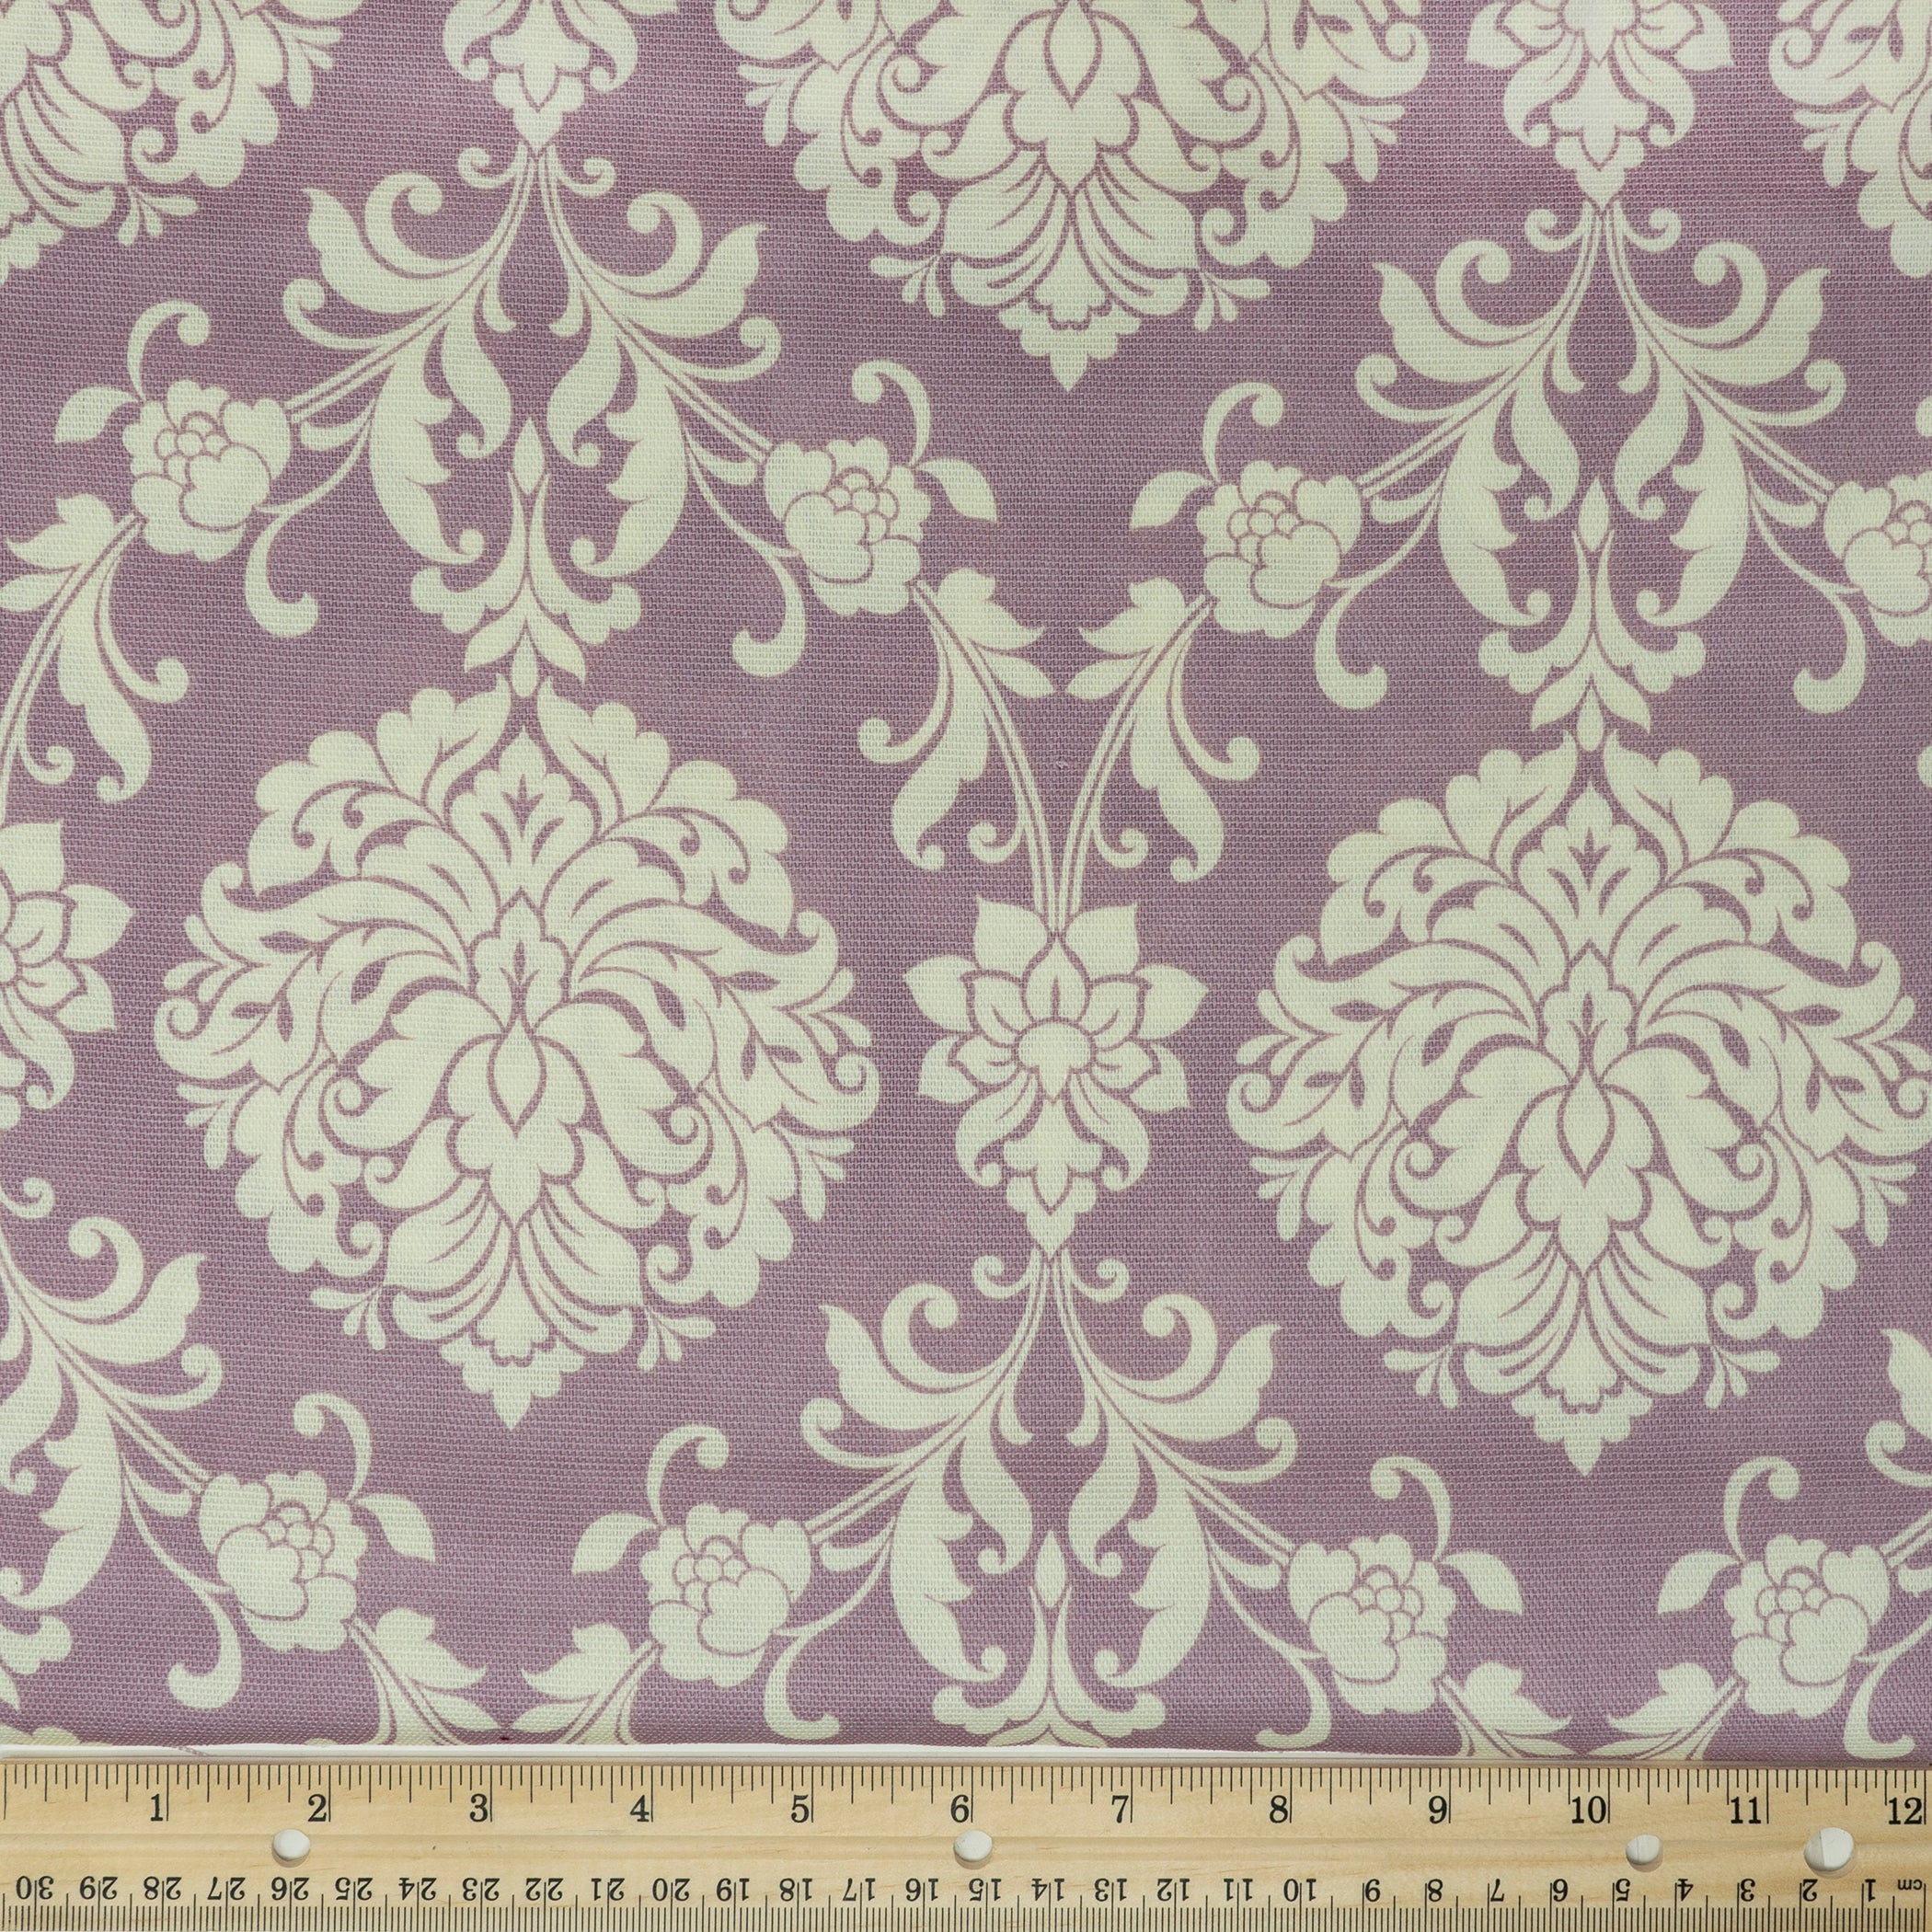 Waverly Inspirations 100% Cotton Duck 45" Width Small Damask Lilac Color Sewing Fabric by the Yard